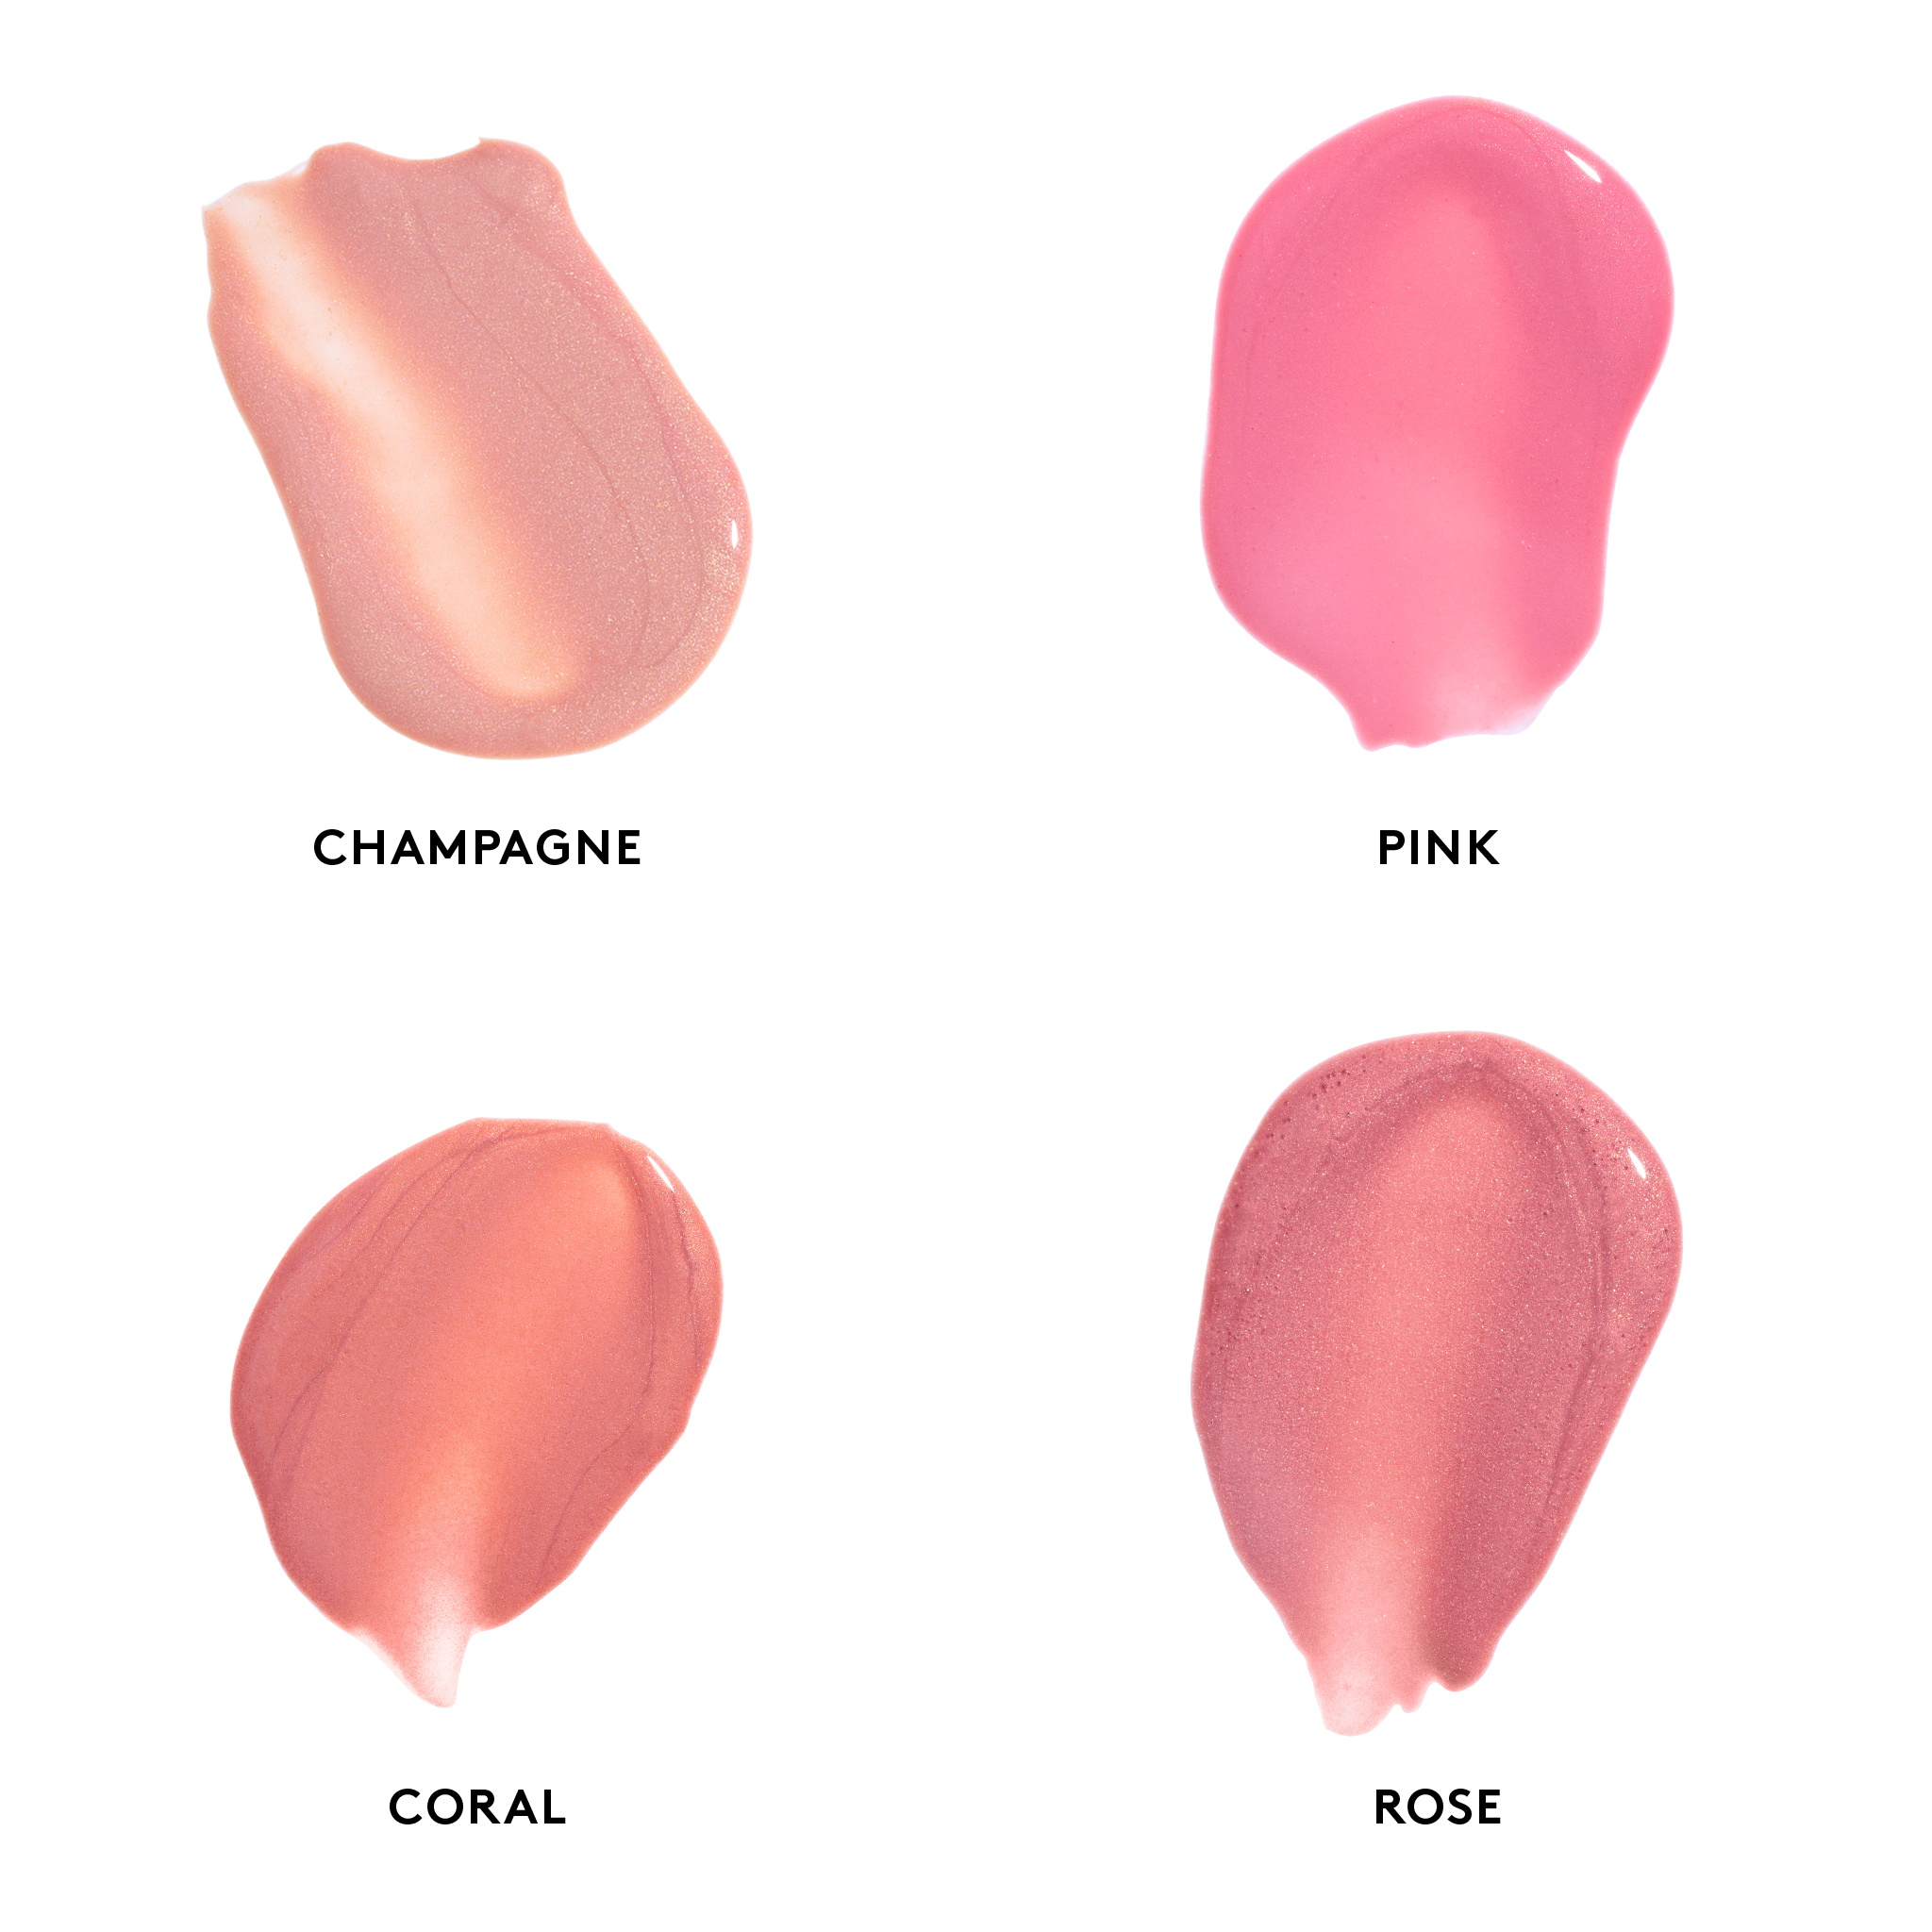 Lip Shine SPF 35 swatches left to right: Champagne, Pink, Coral, Rose || all